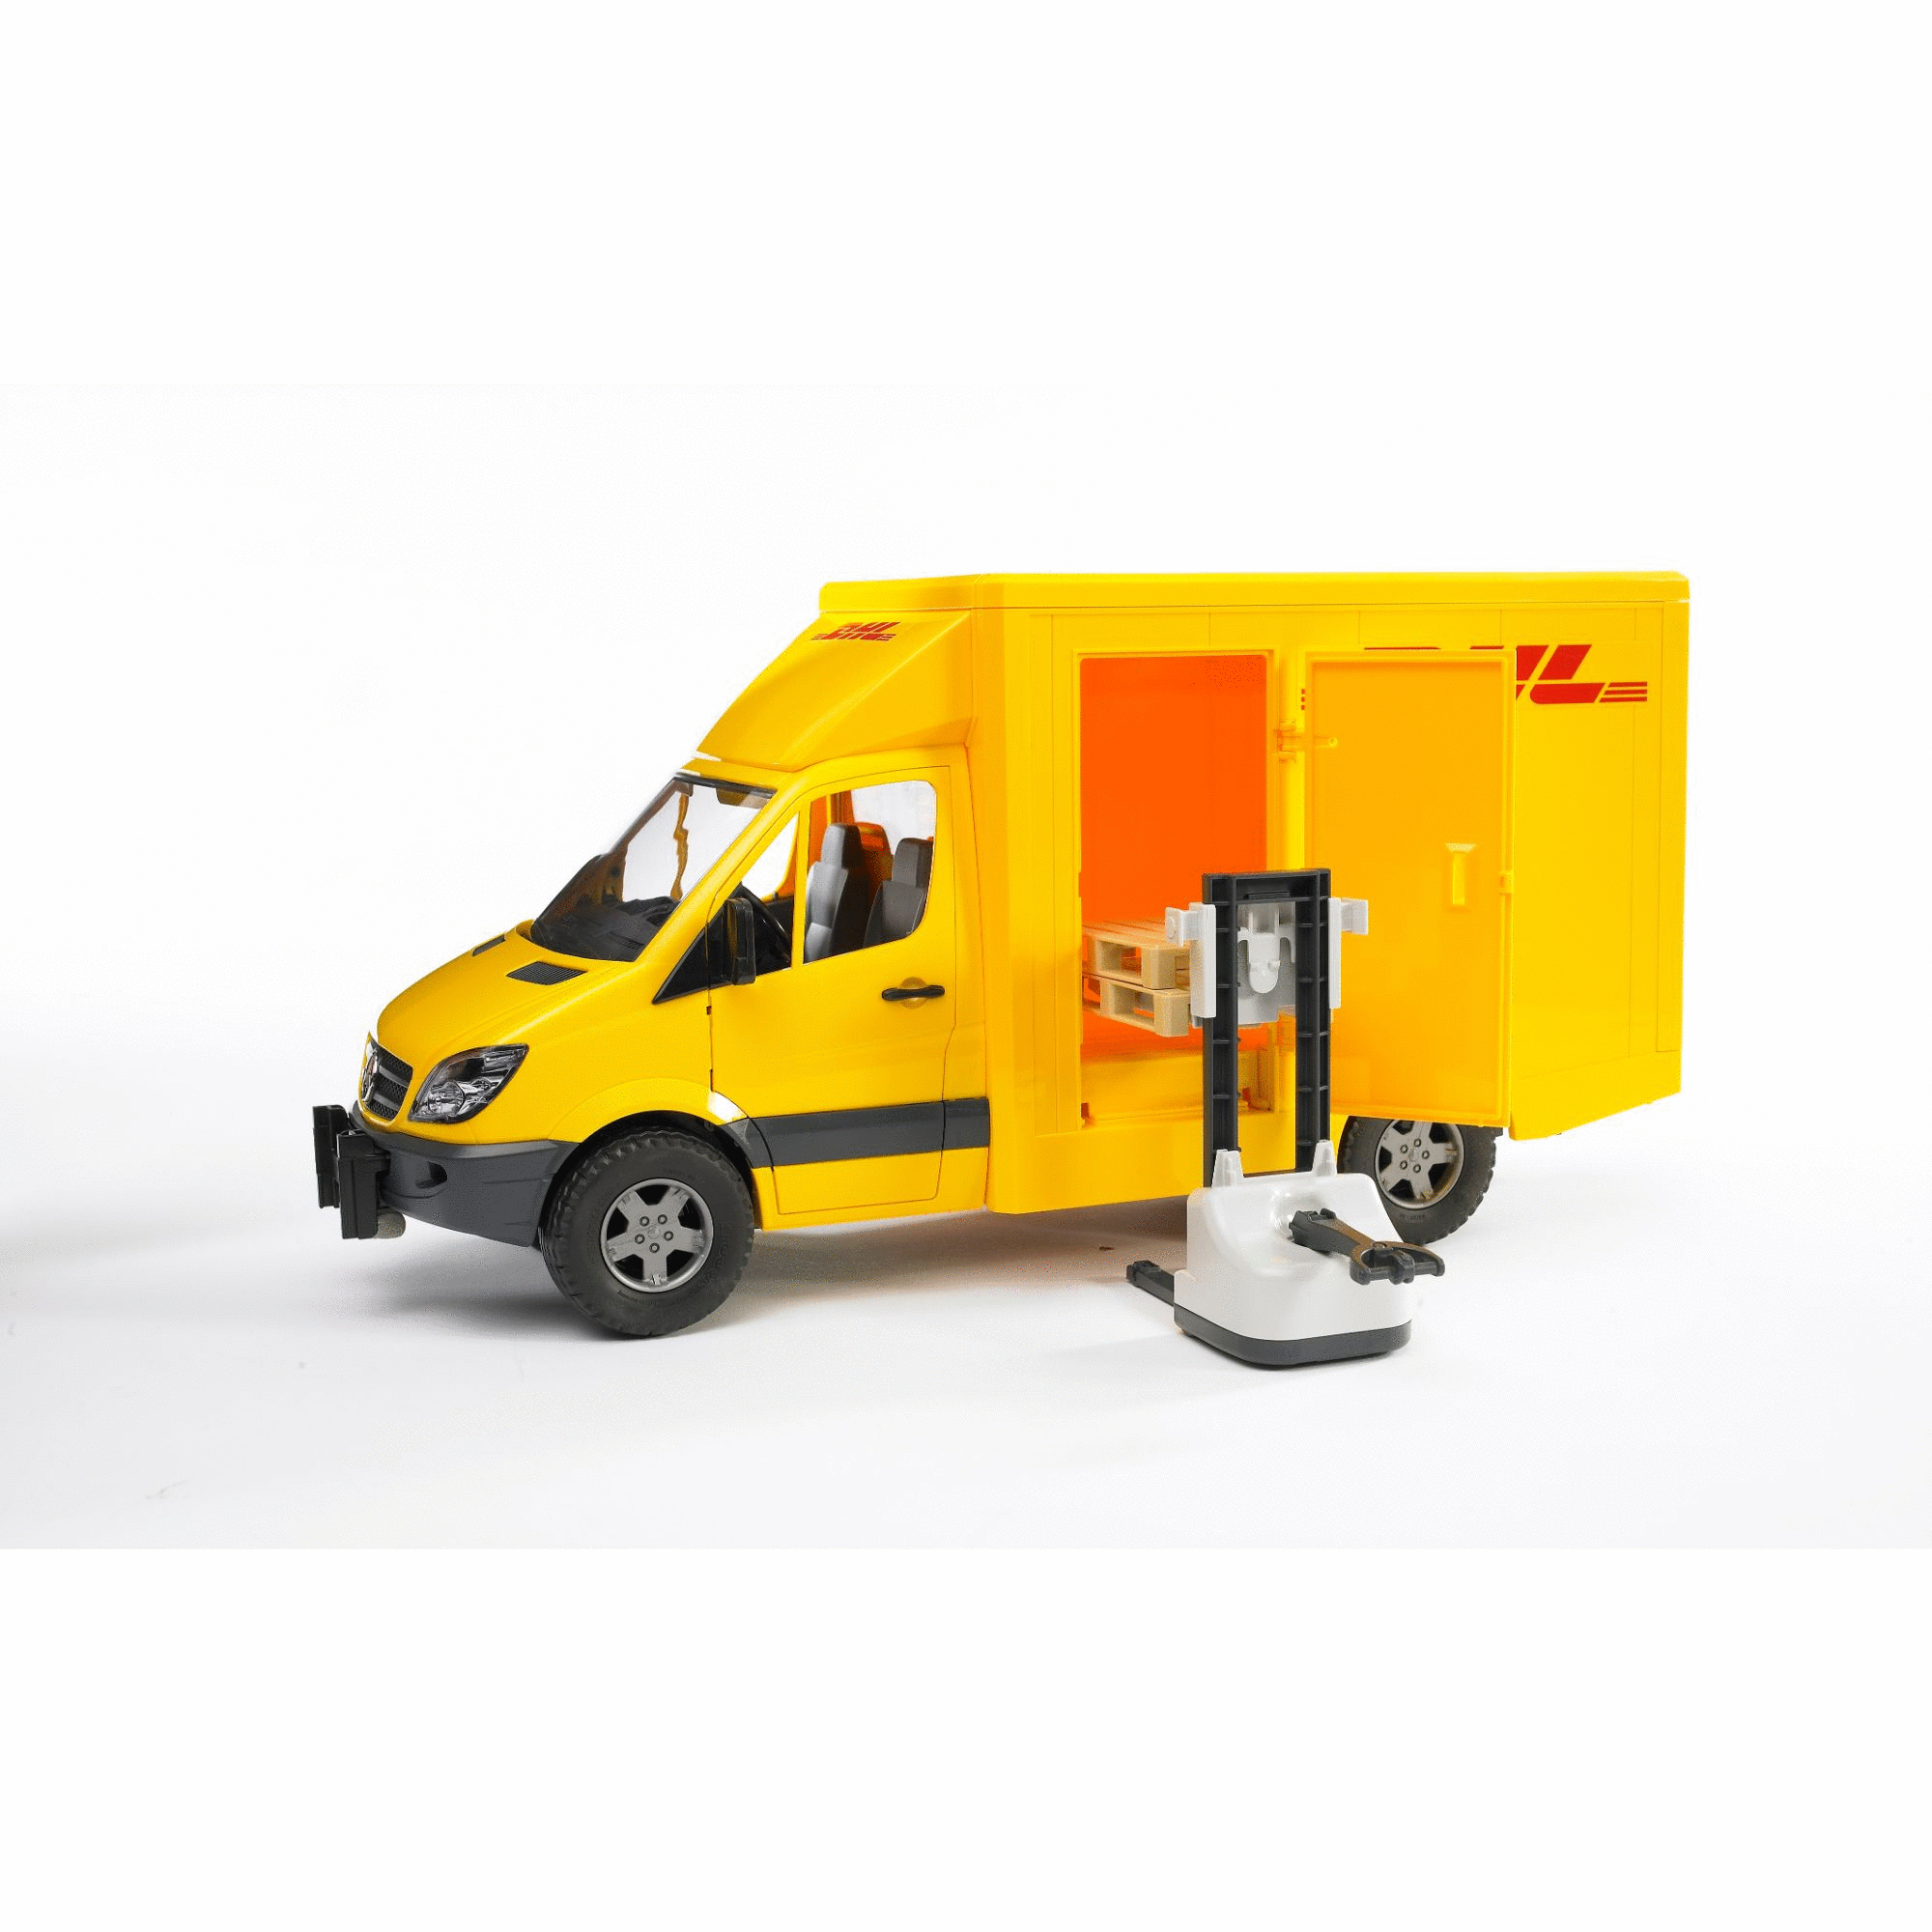 02534 MB Sprinter DHL truck with manually operated pallet jack